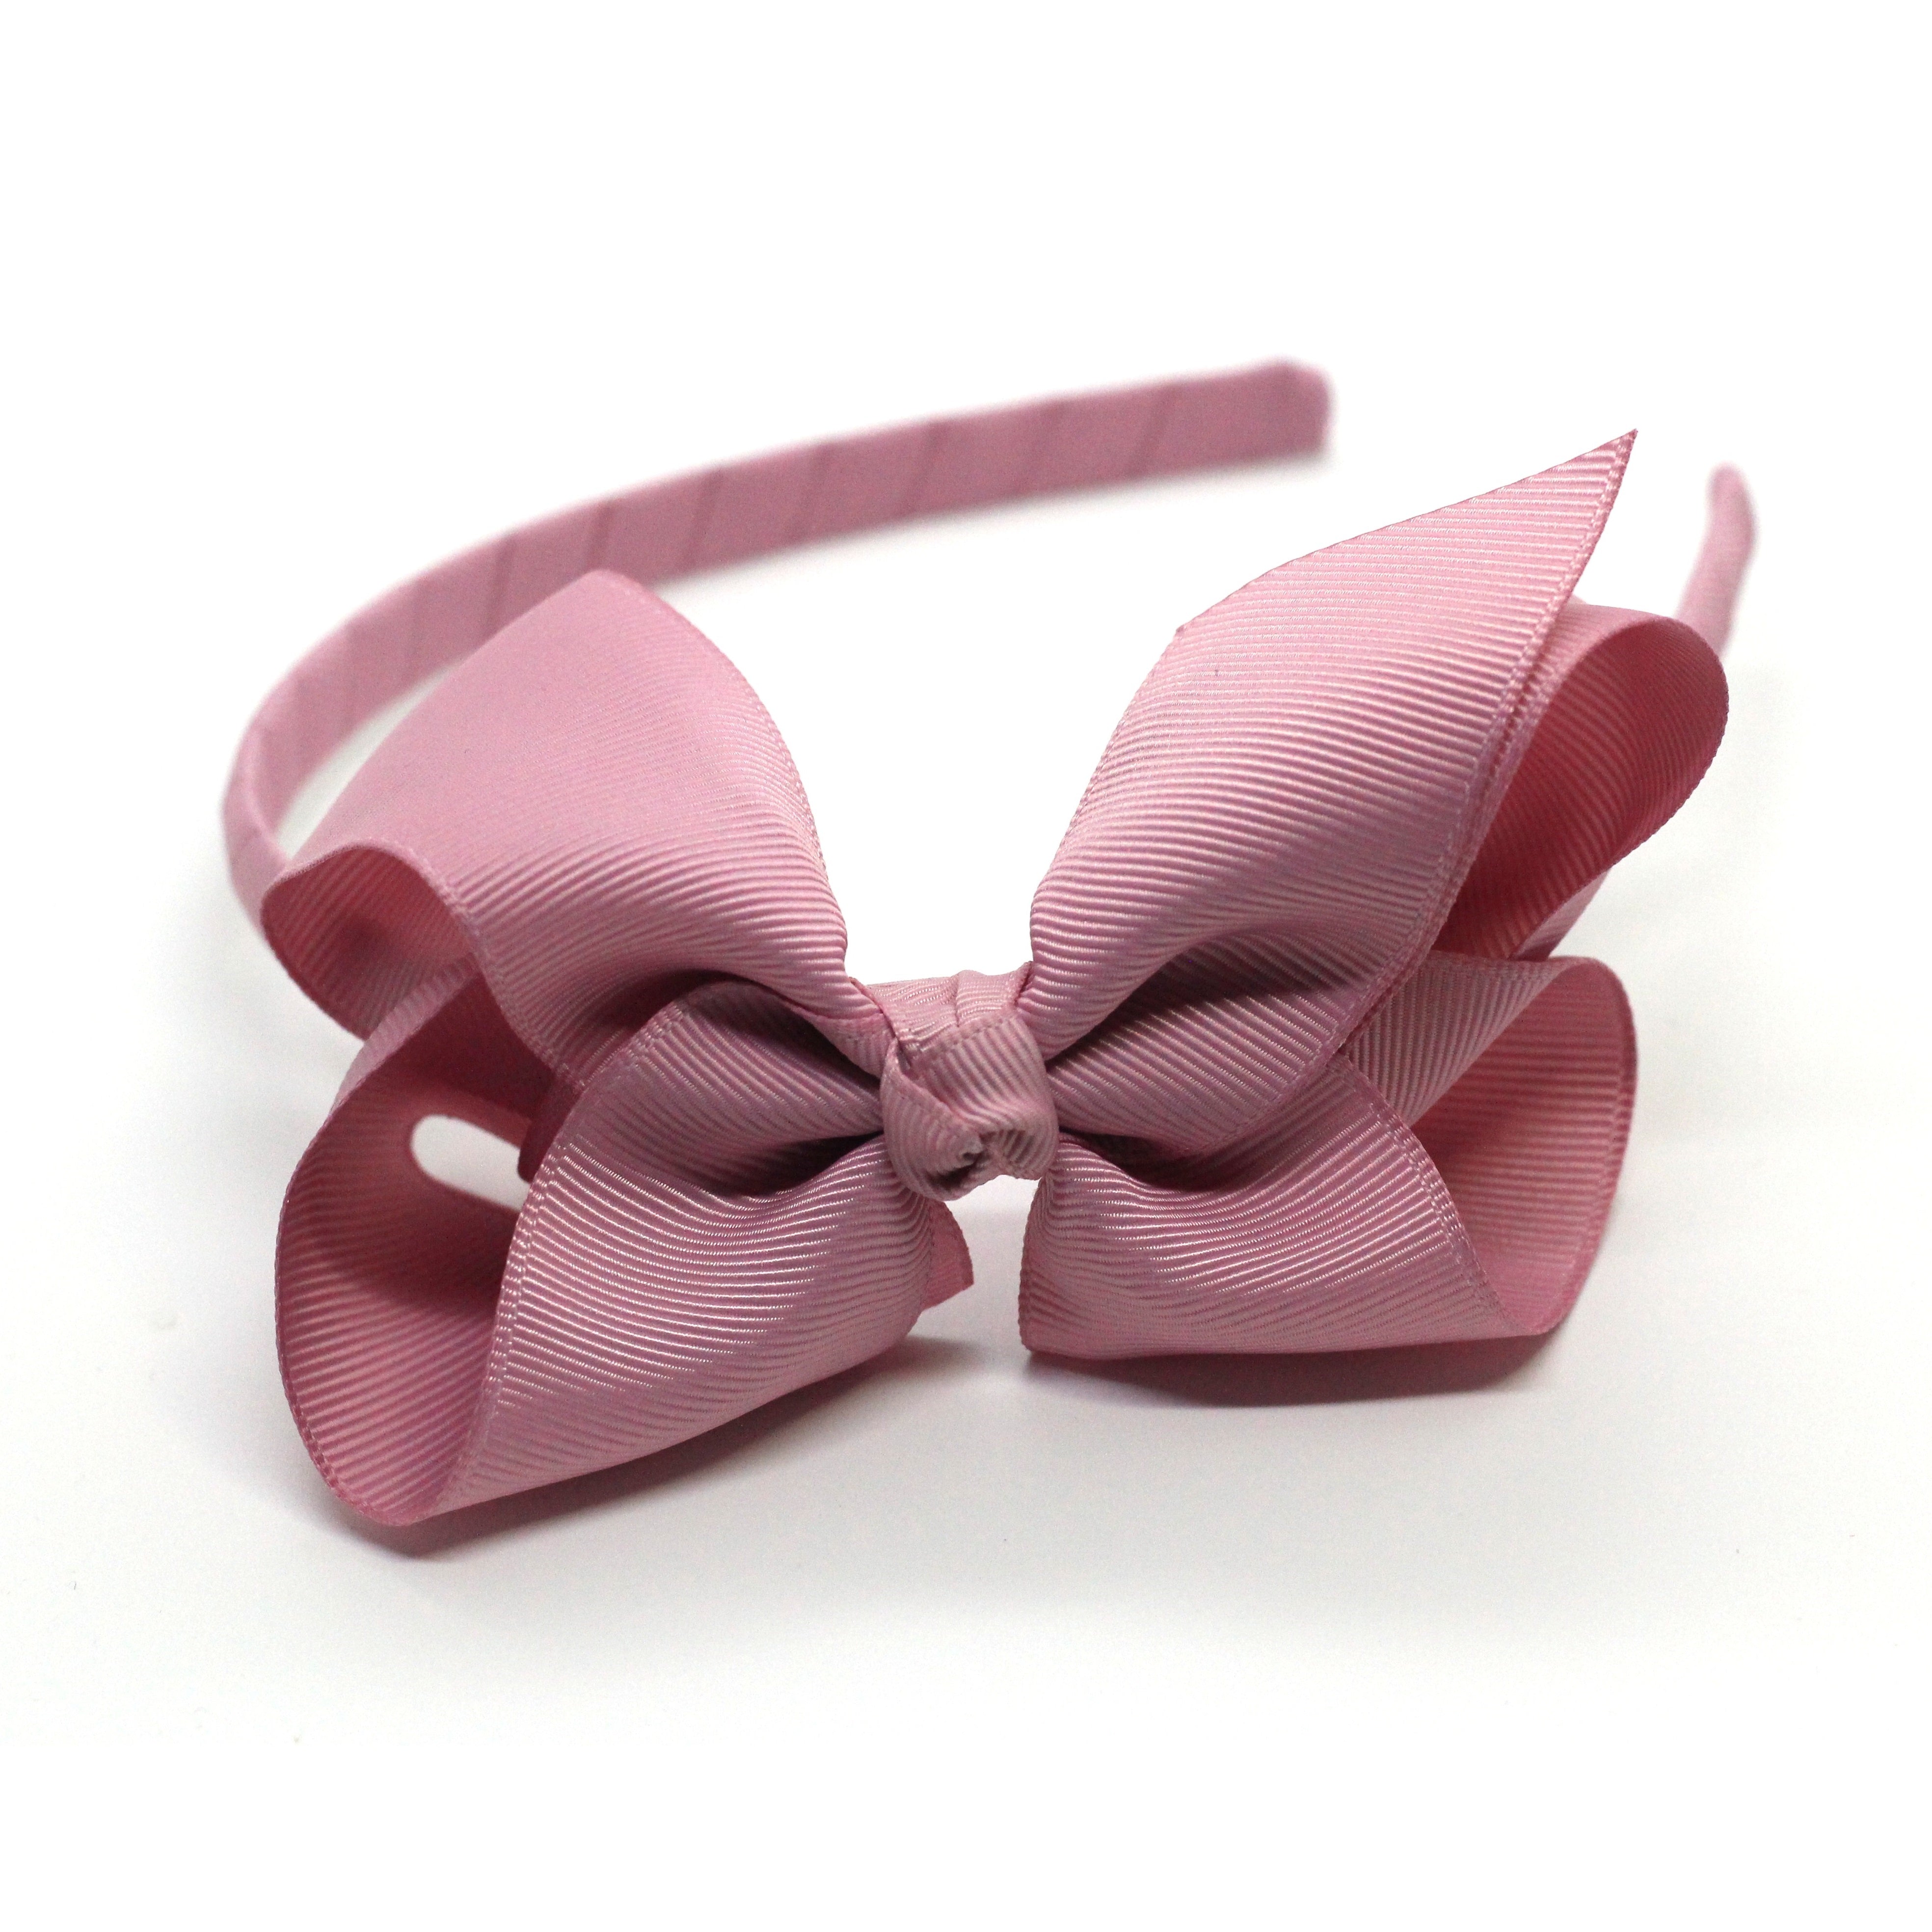 Premium Quality Bow Headband in Quartz Pink. Oeko Tex certified gros graind ribbon. Perfect to complete an outfit or to dress up